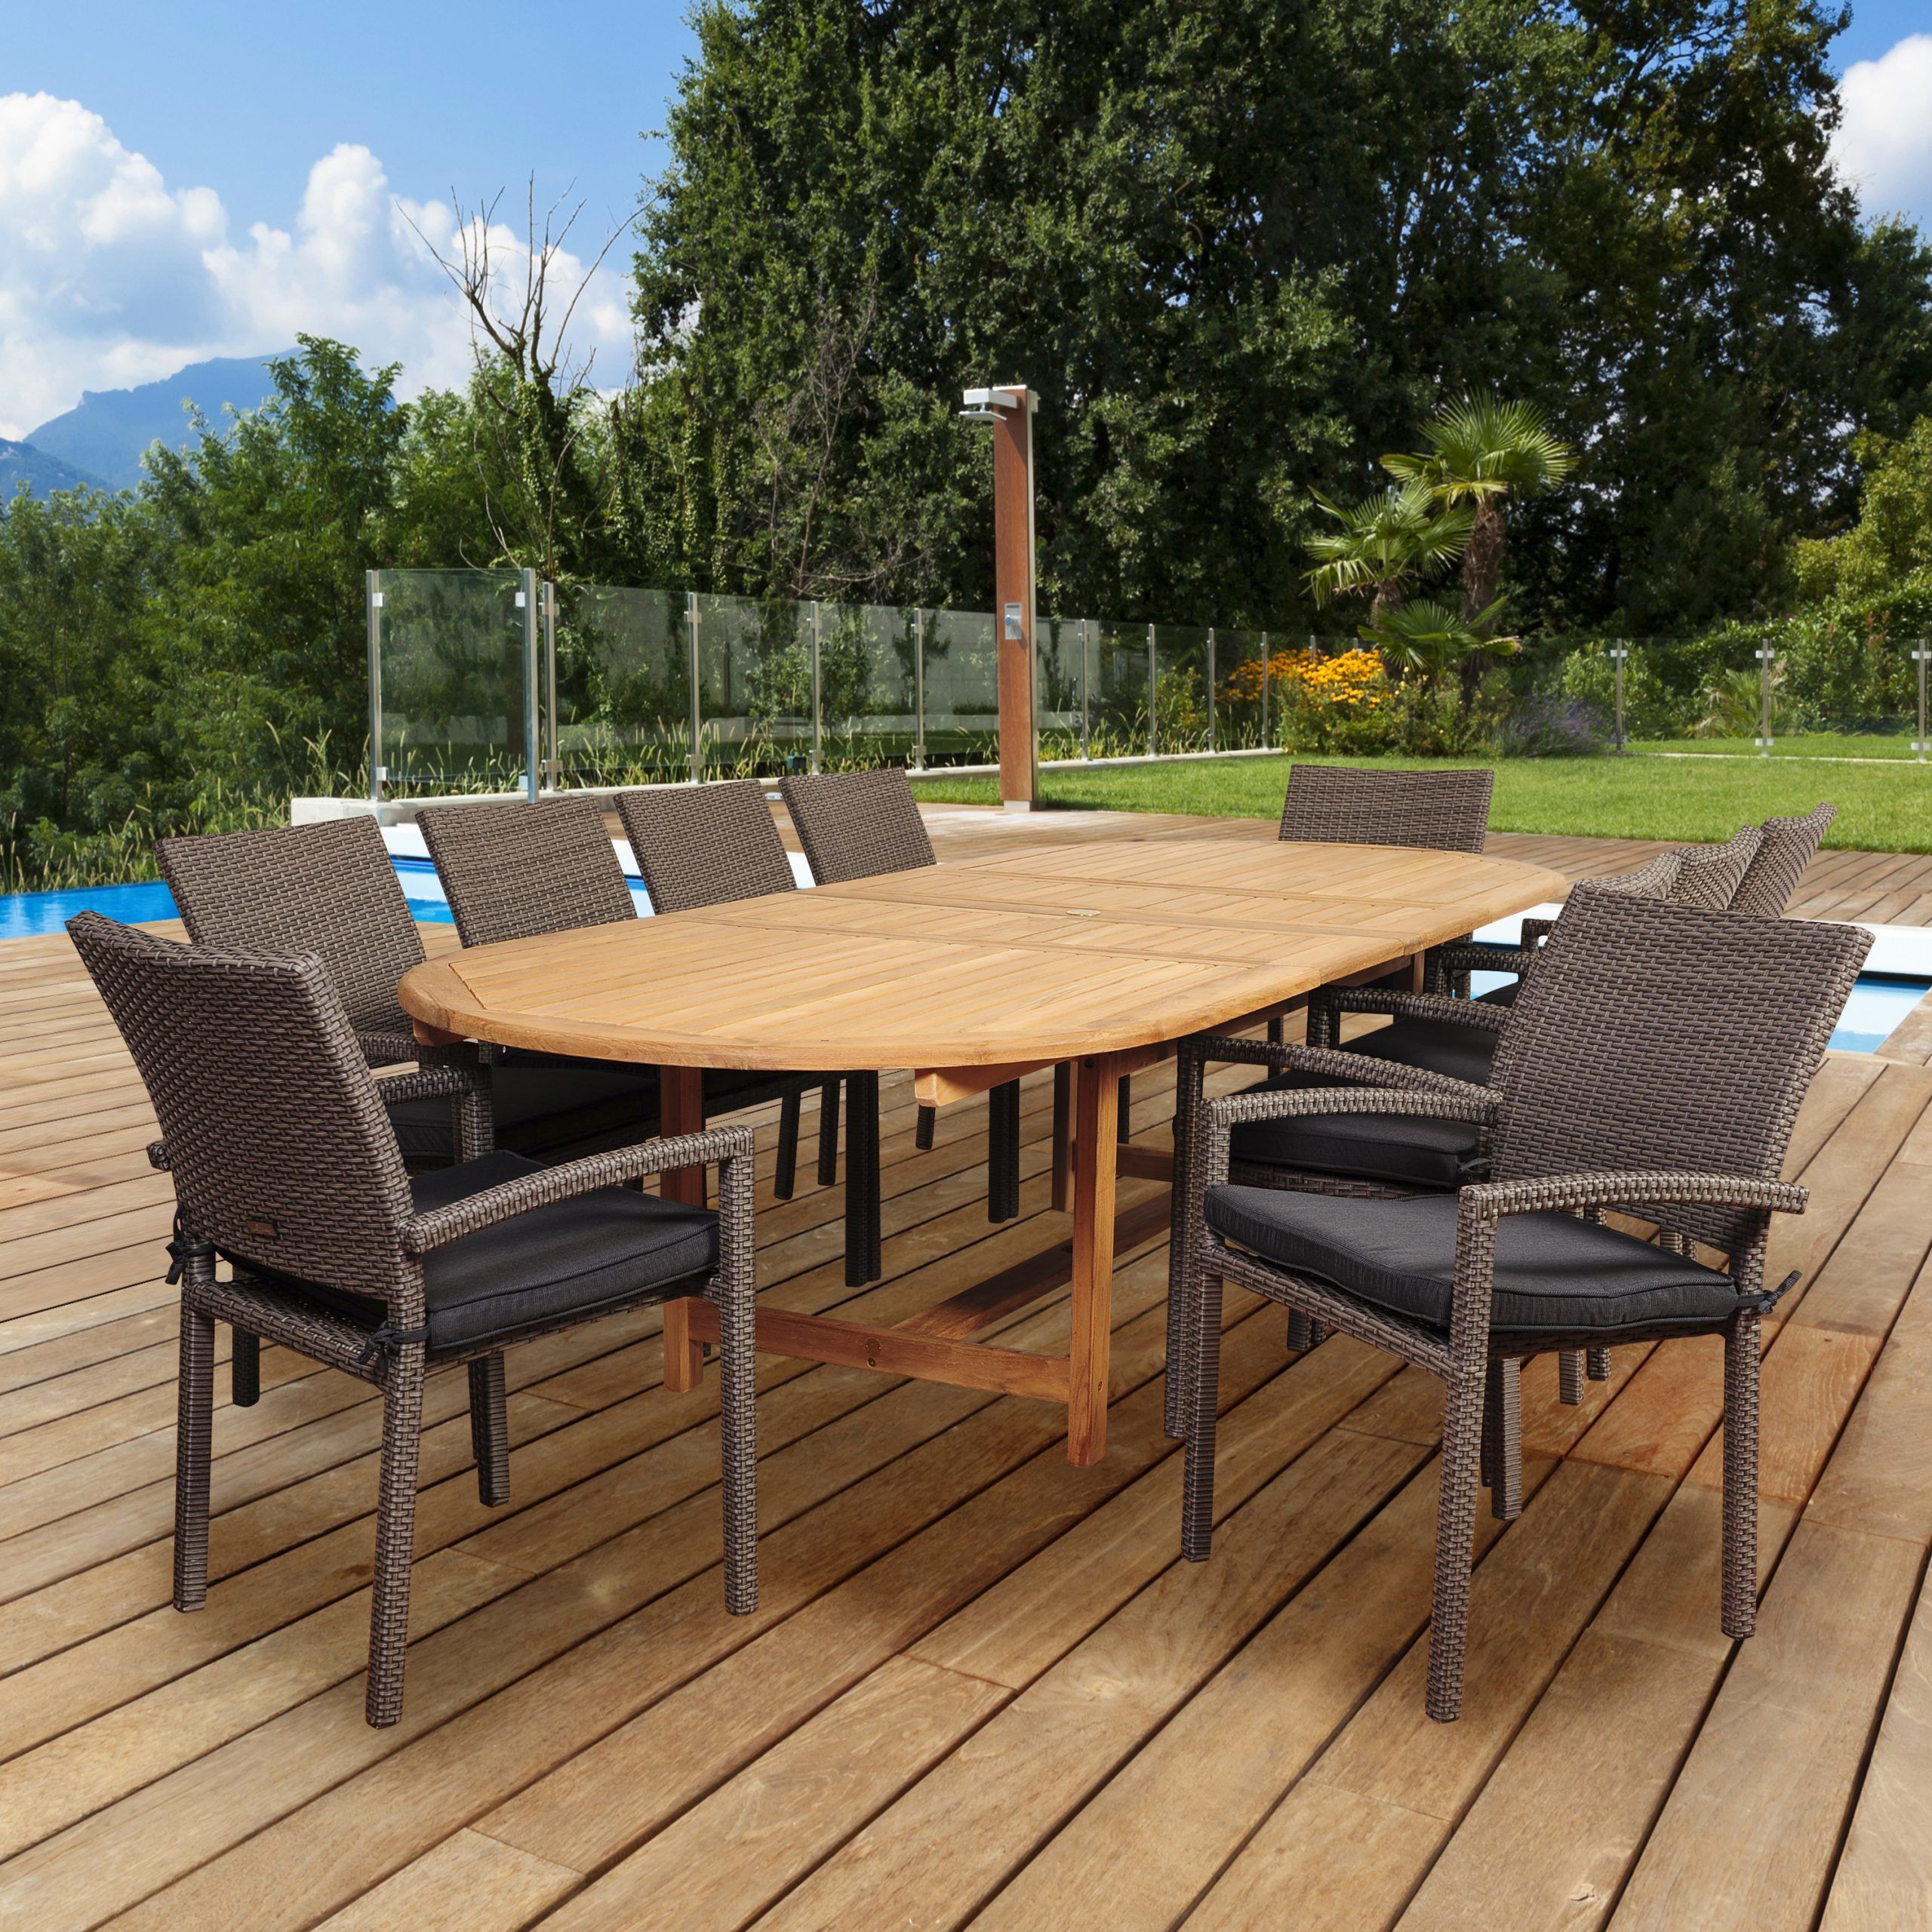 Amazonia City Villa 11 Piece Teak/Wicker Double Extendable Oval Dining Inside Teak And Wicker Dining Sets (View 2 of 15)